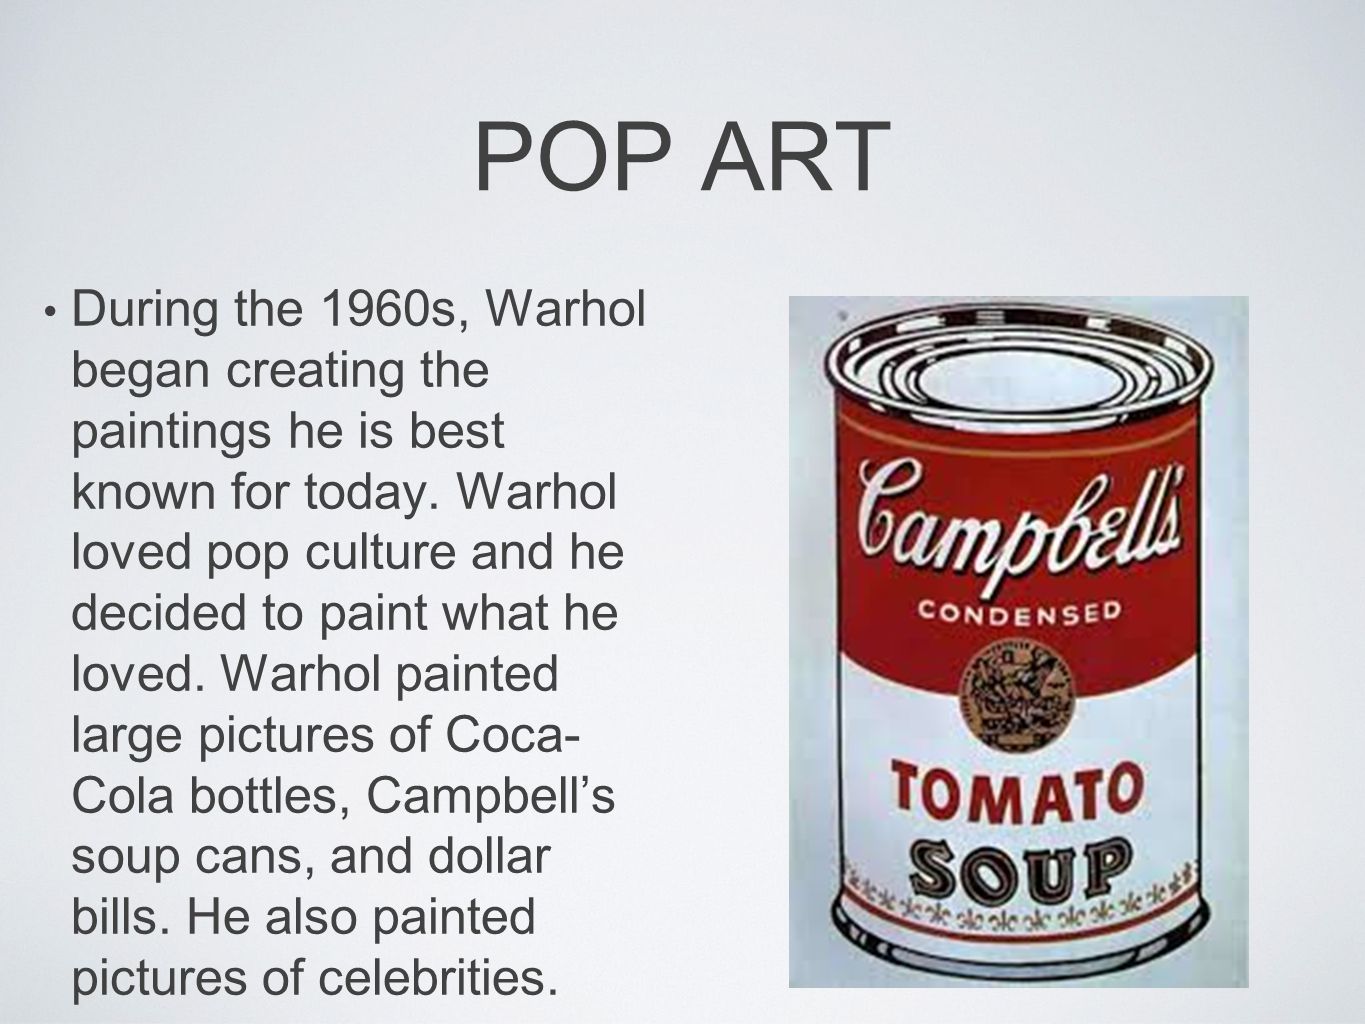 POP ART During the 1960s, Warhol began creating the paintings he is best known for today.